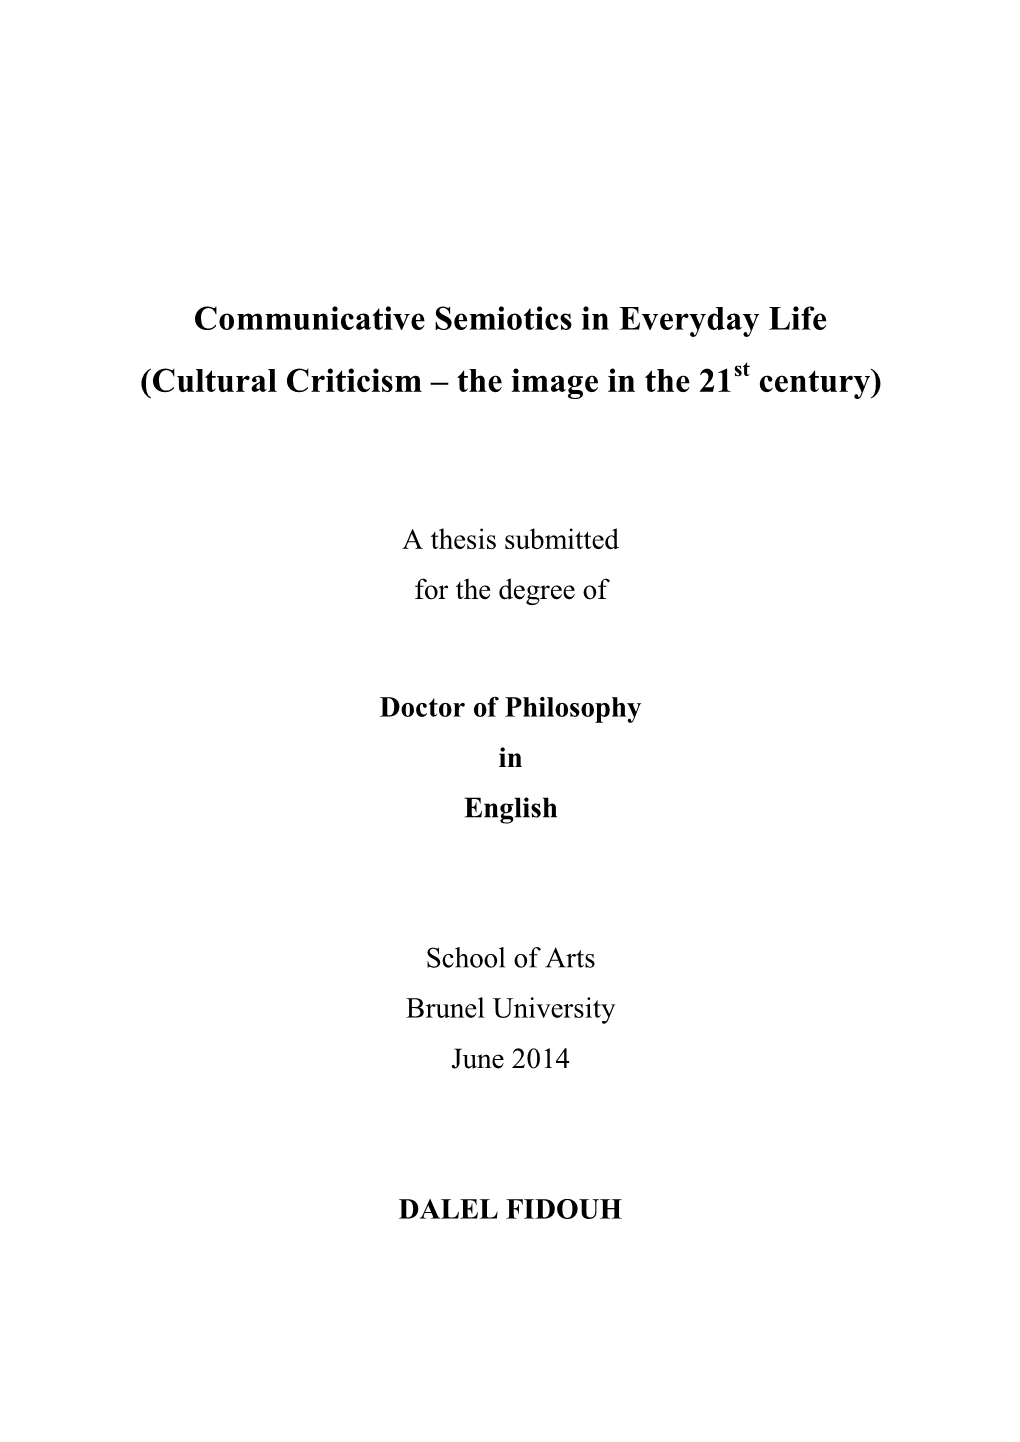 Communicative Semiotics in Everyday Life (Cultural Criticism – the Image in the 21St Century)